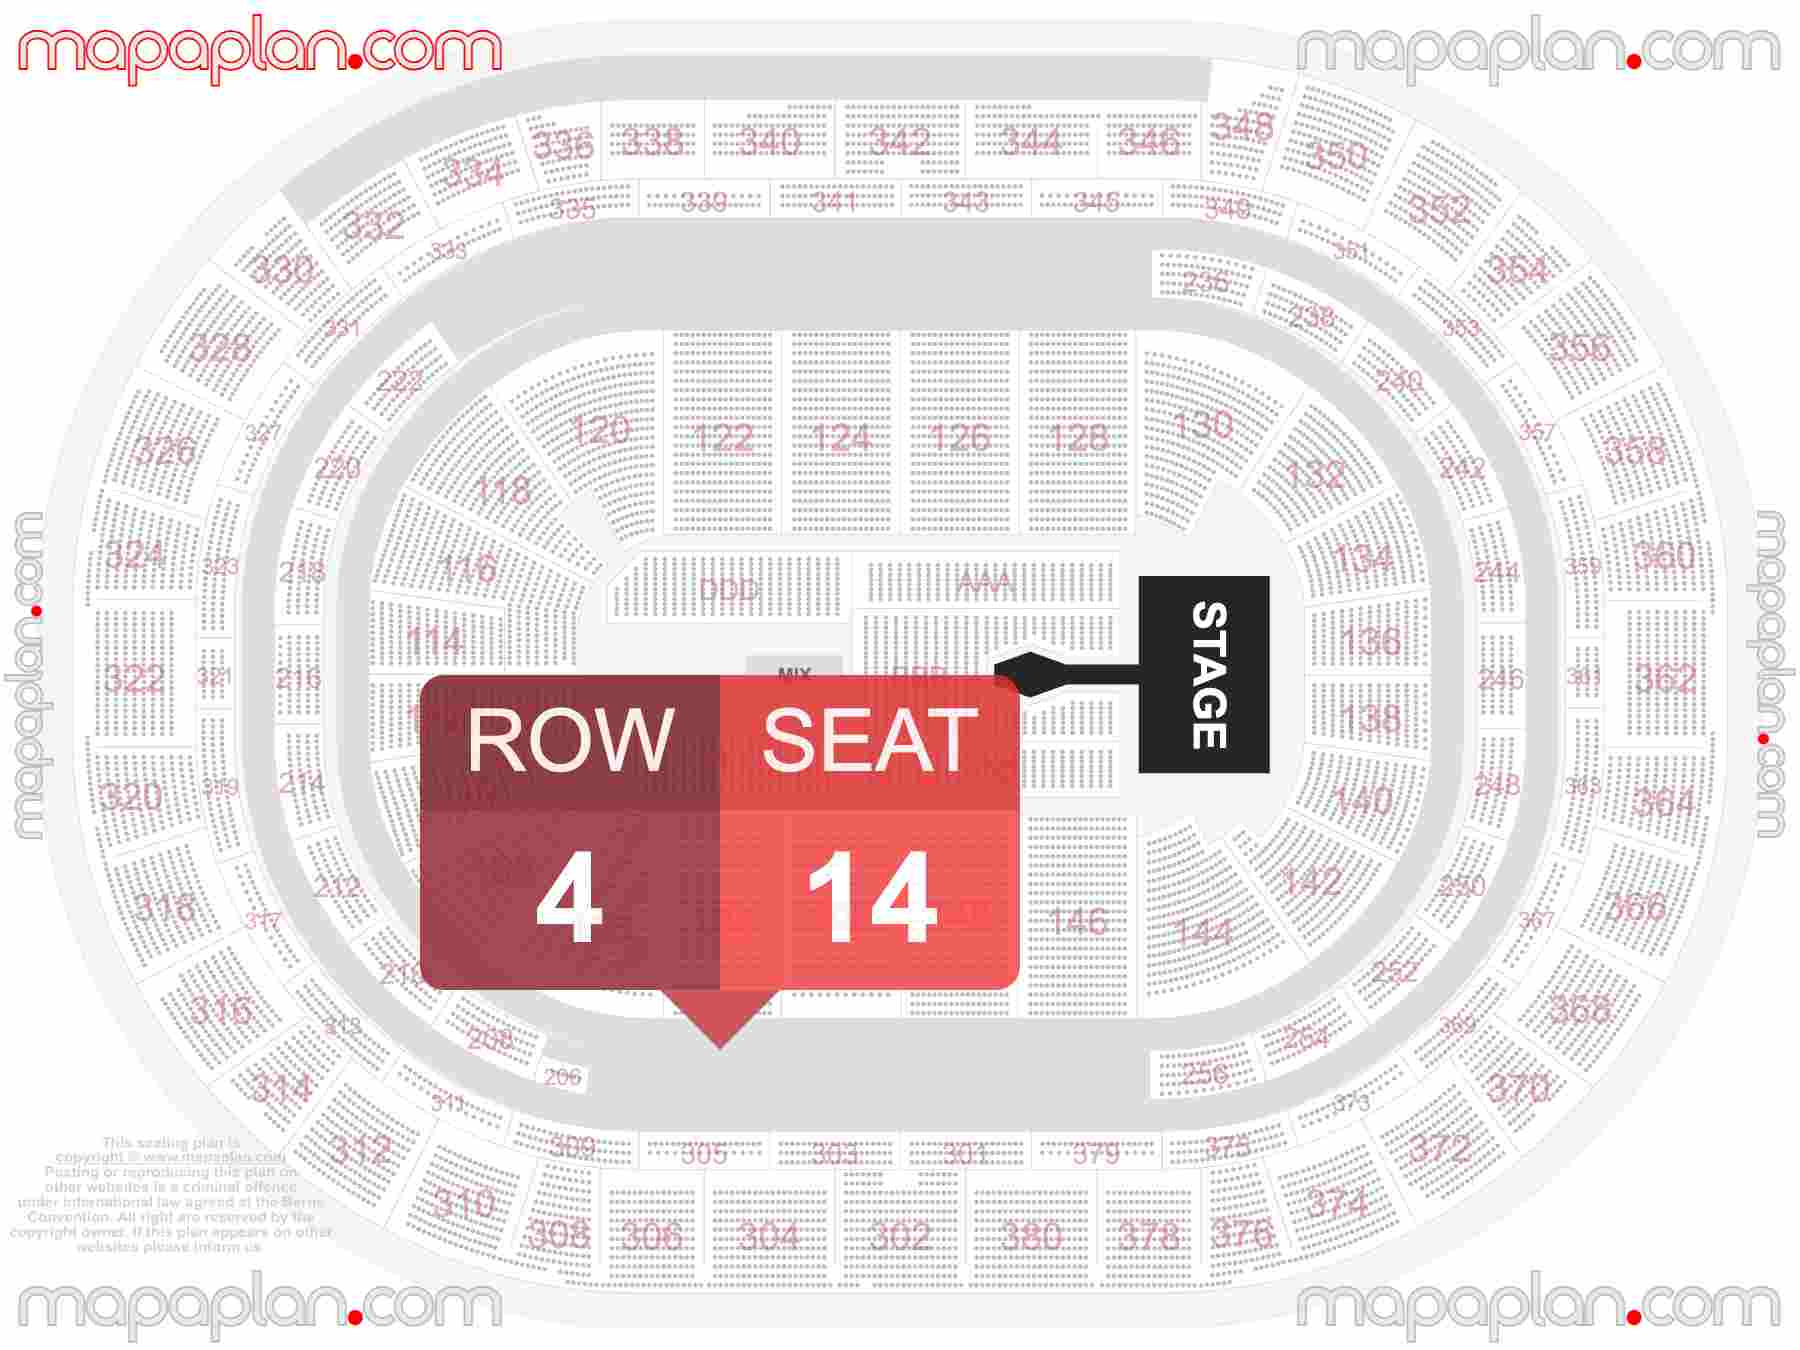 Denver Ball Arena seating chart Catwalk extended runway concert B-stage seating chart with exact section numbers showing best rows and seats selection 3d layout - Best interactive seat finder tool with precise detailed location data